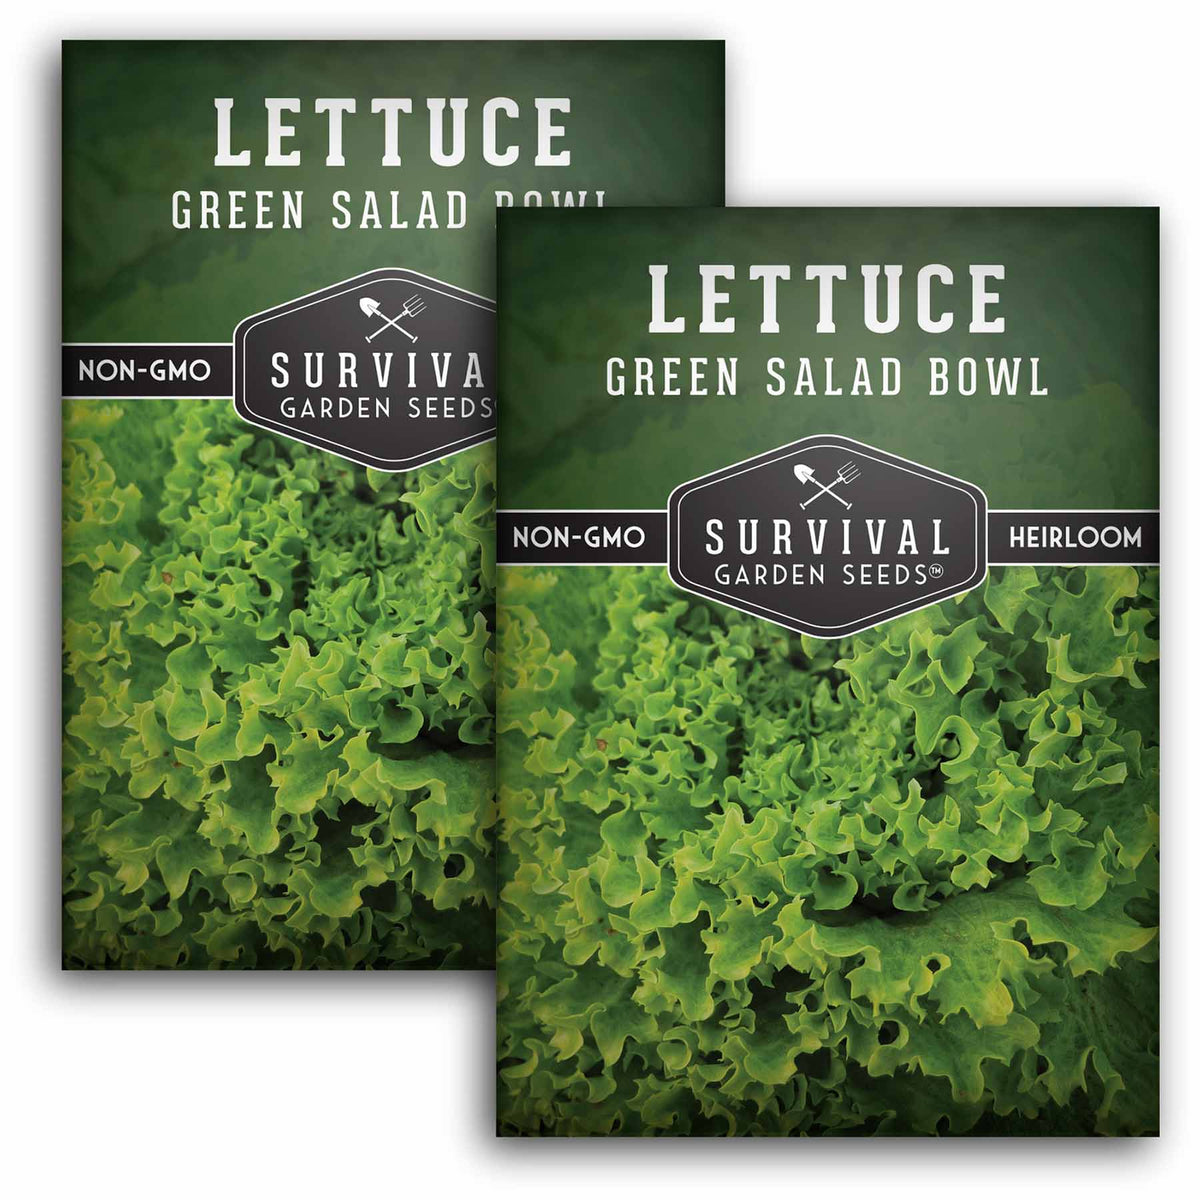 2 packets of Green Salad Bowl Lettuce seeds